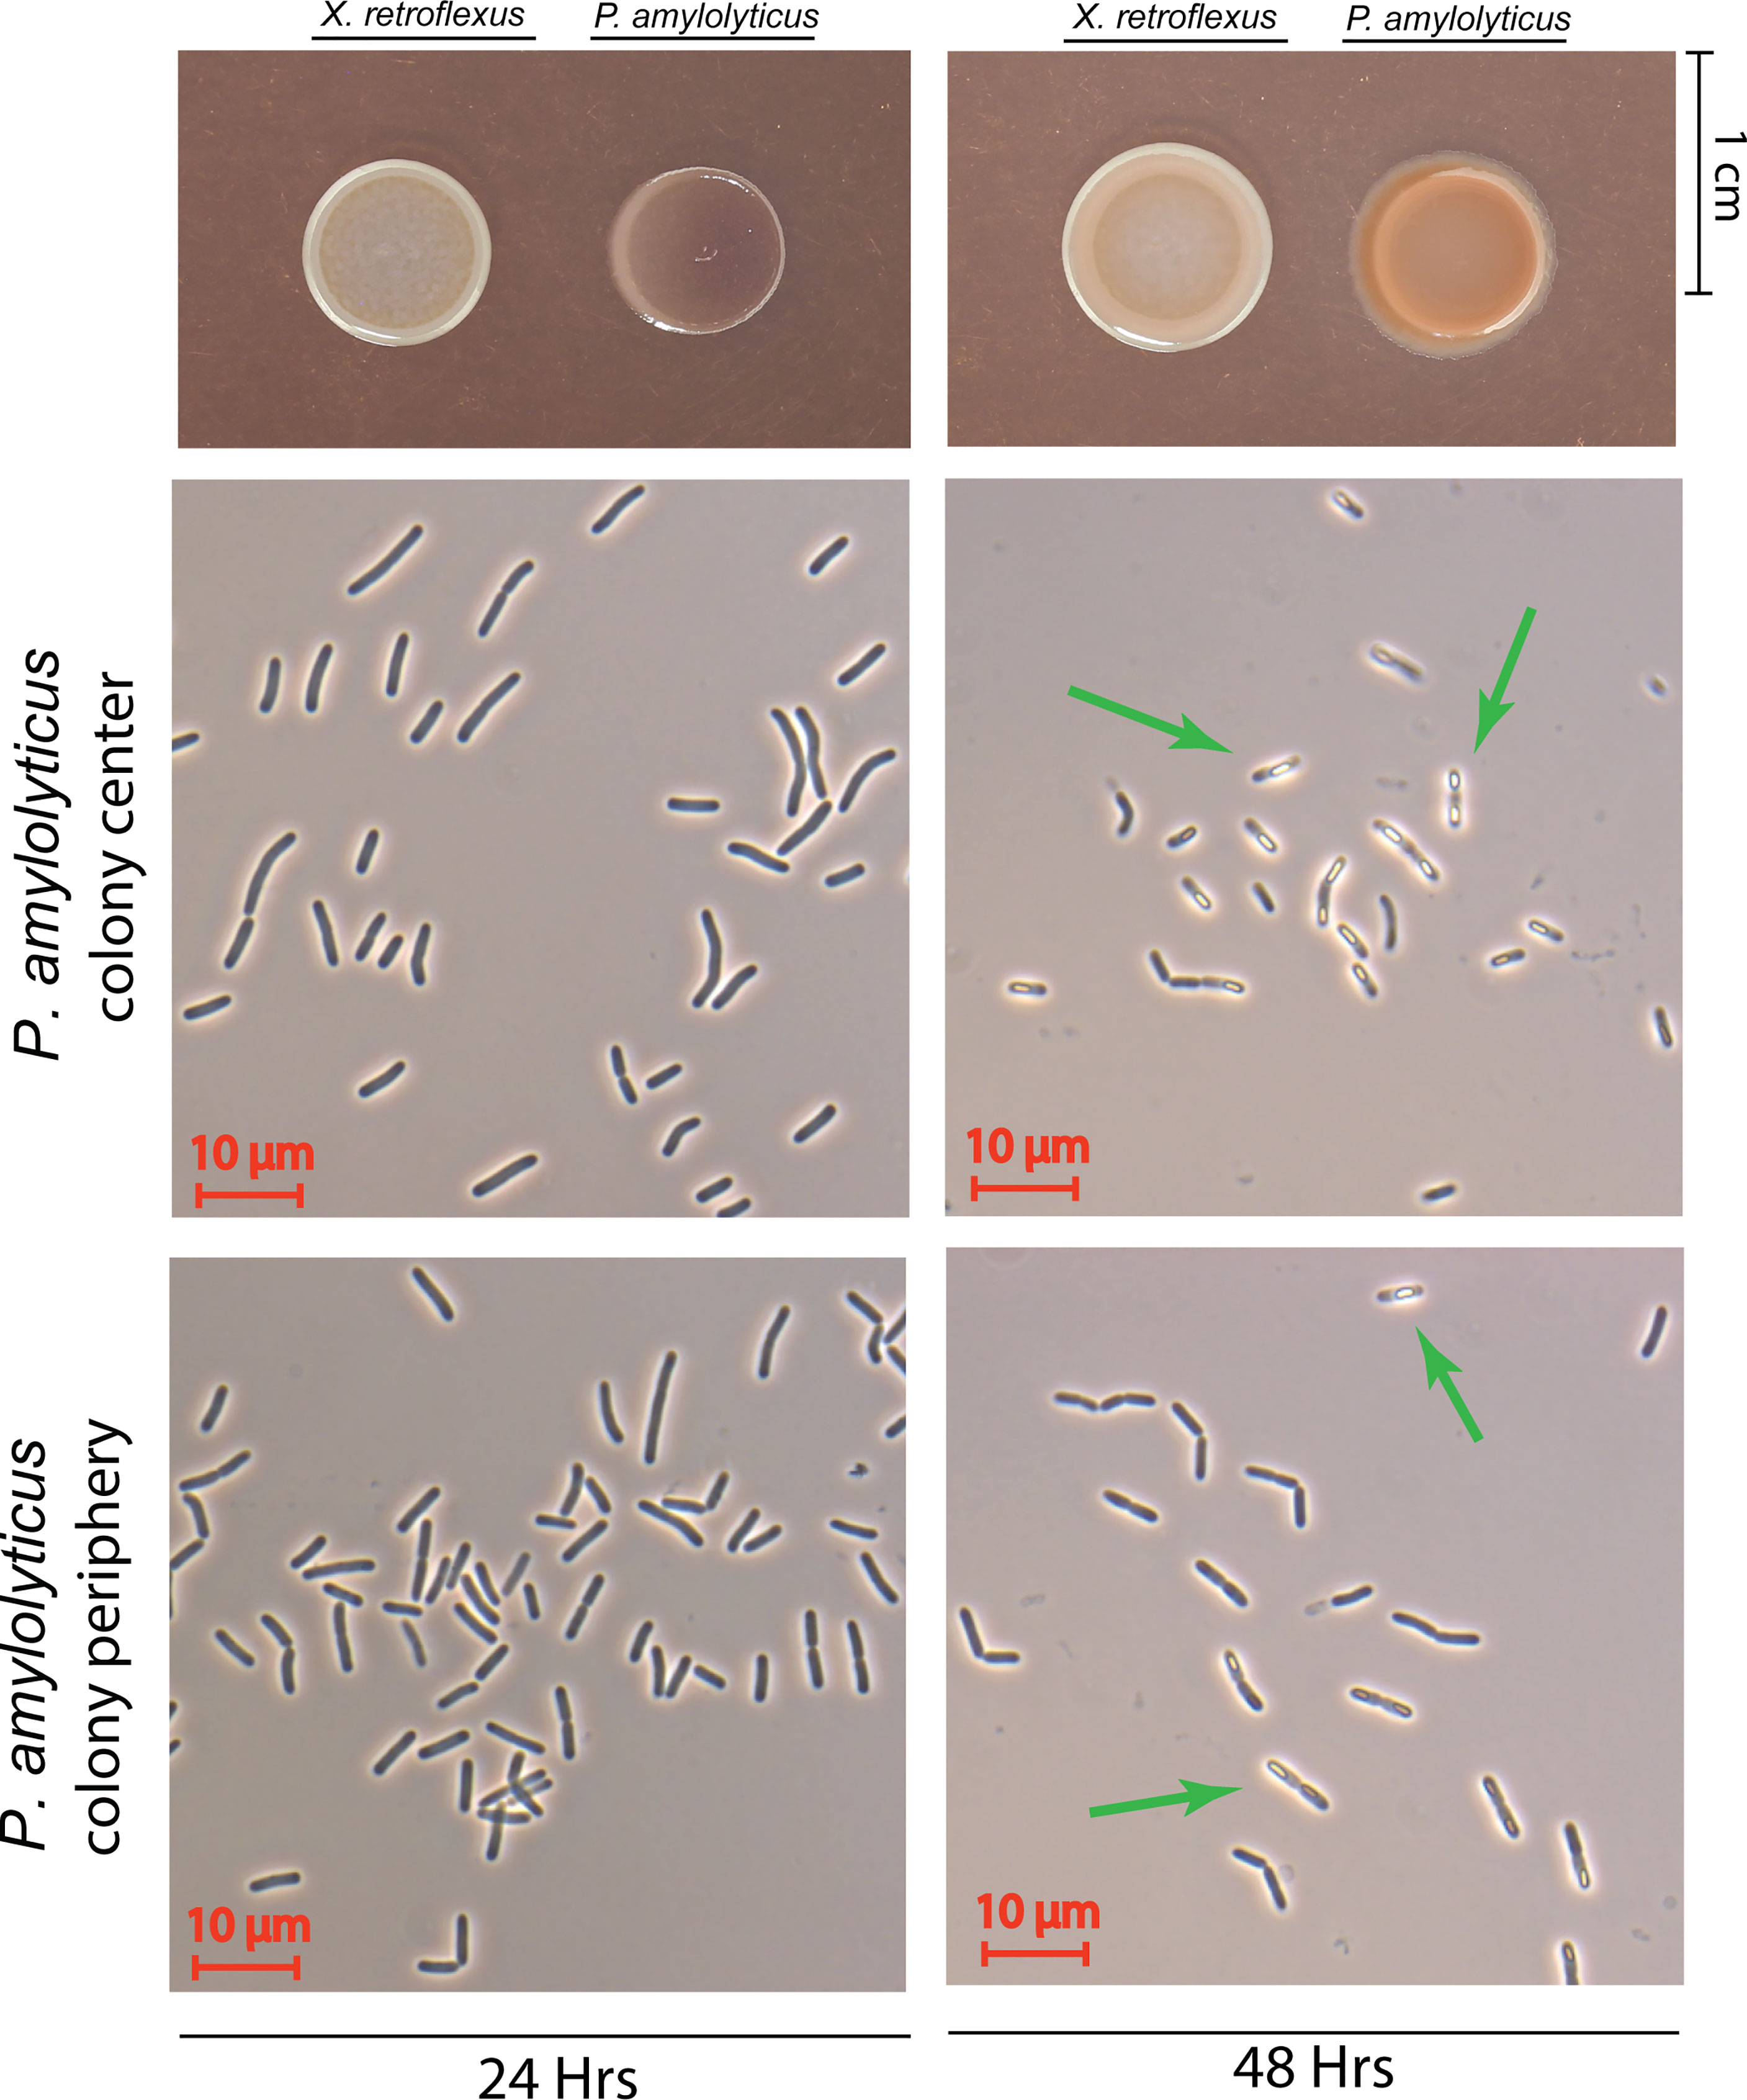 Frontiers  Metabolic Profiling of Interspecies Interactions During Sessile  Bacterial Cultivation Reveals Growth and Sporulation Induction in  Paenibacillus amylolyticus in Response to Xanthomonas retroflexus